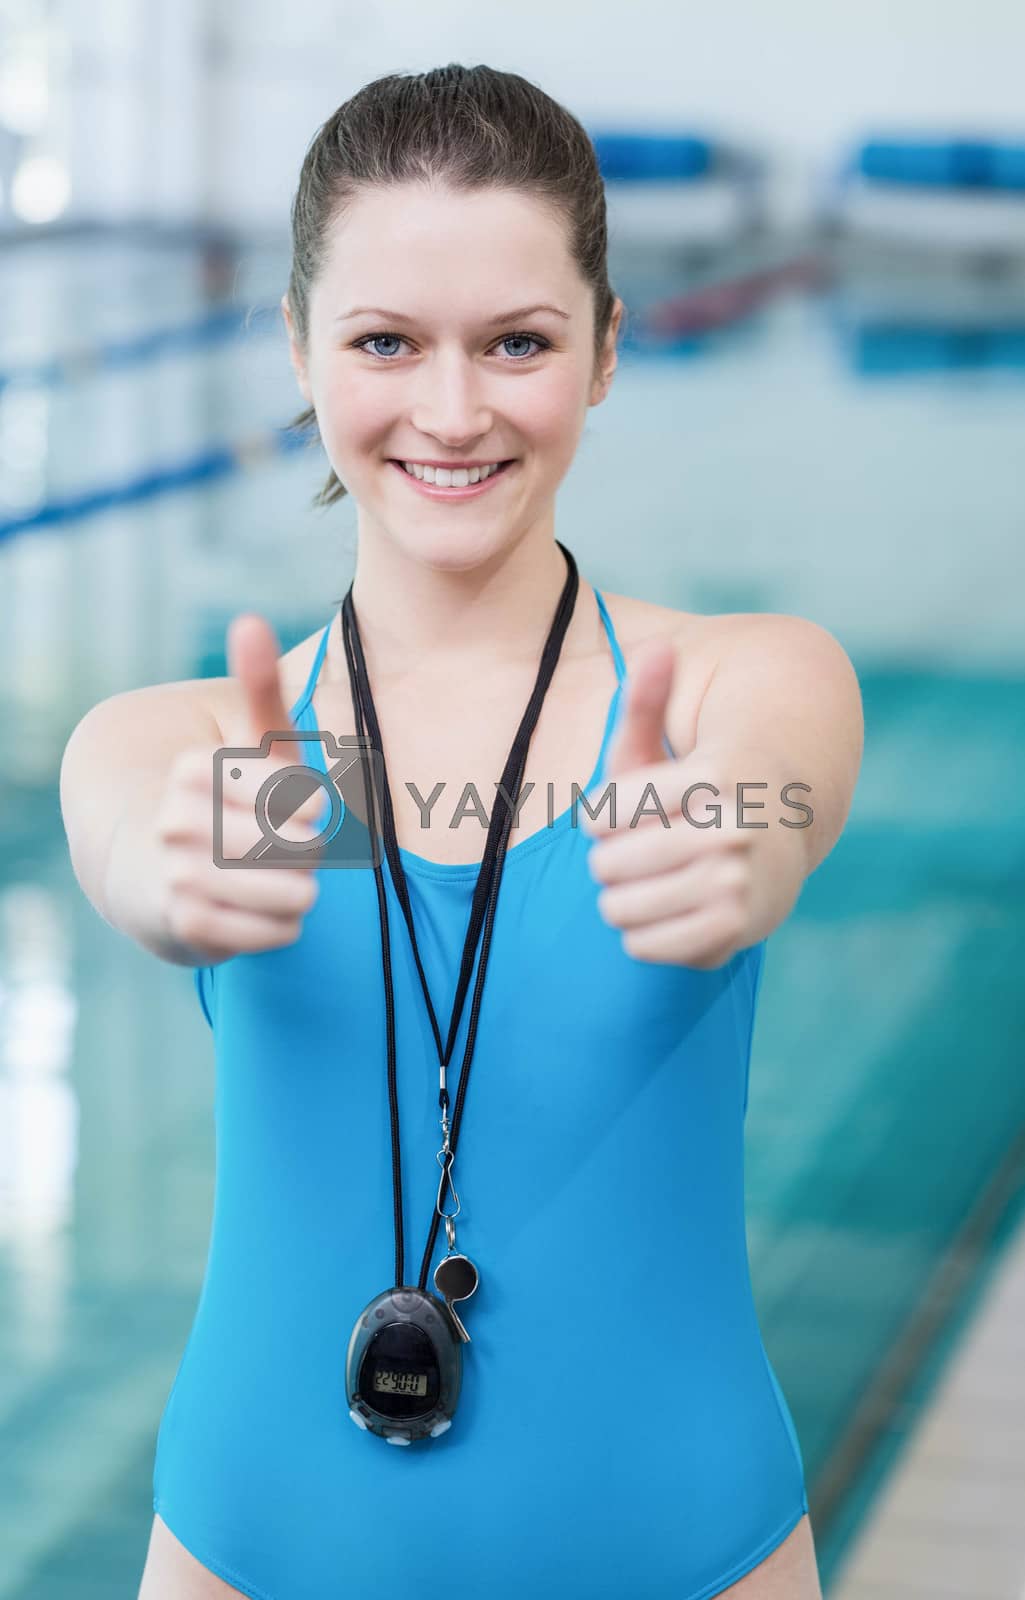 Royalty free image of Pretty trainer with thumbs up by Wavebreakmedia